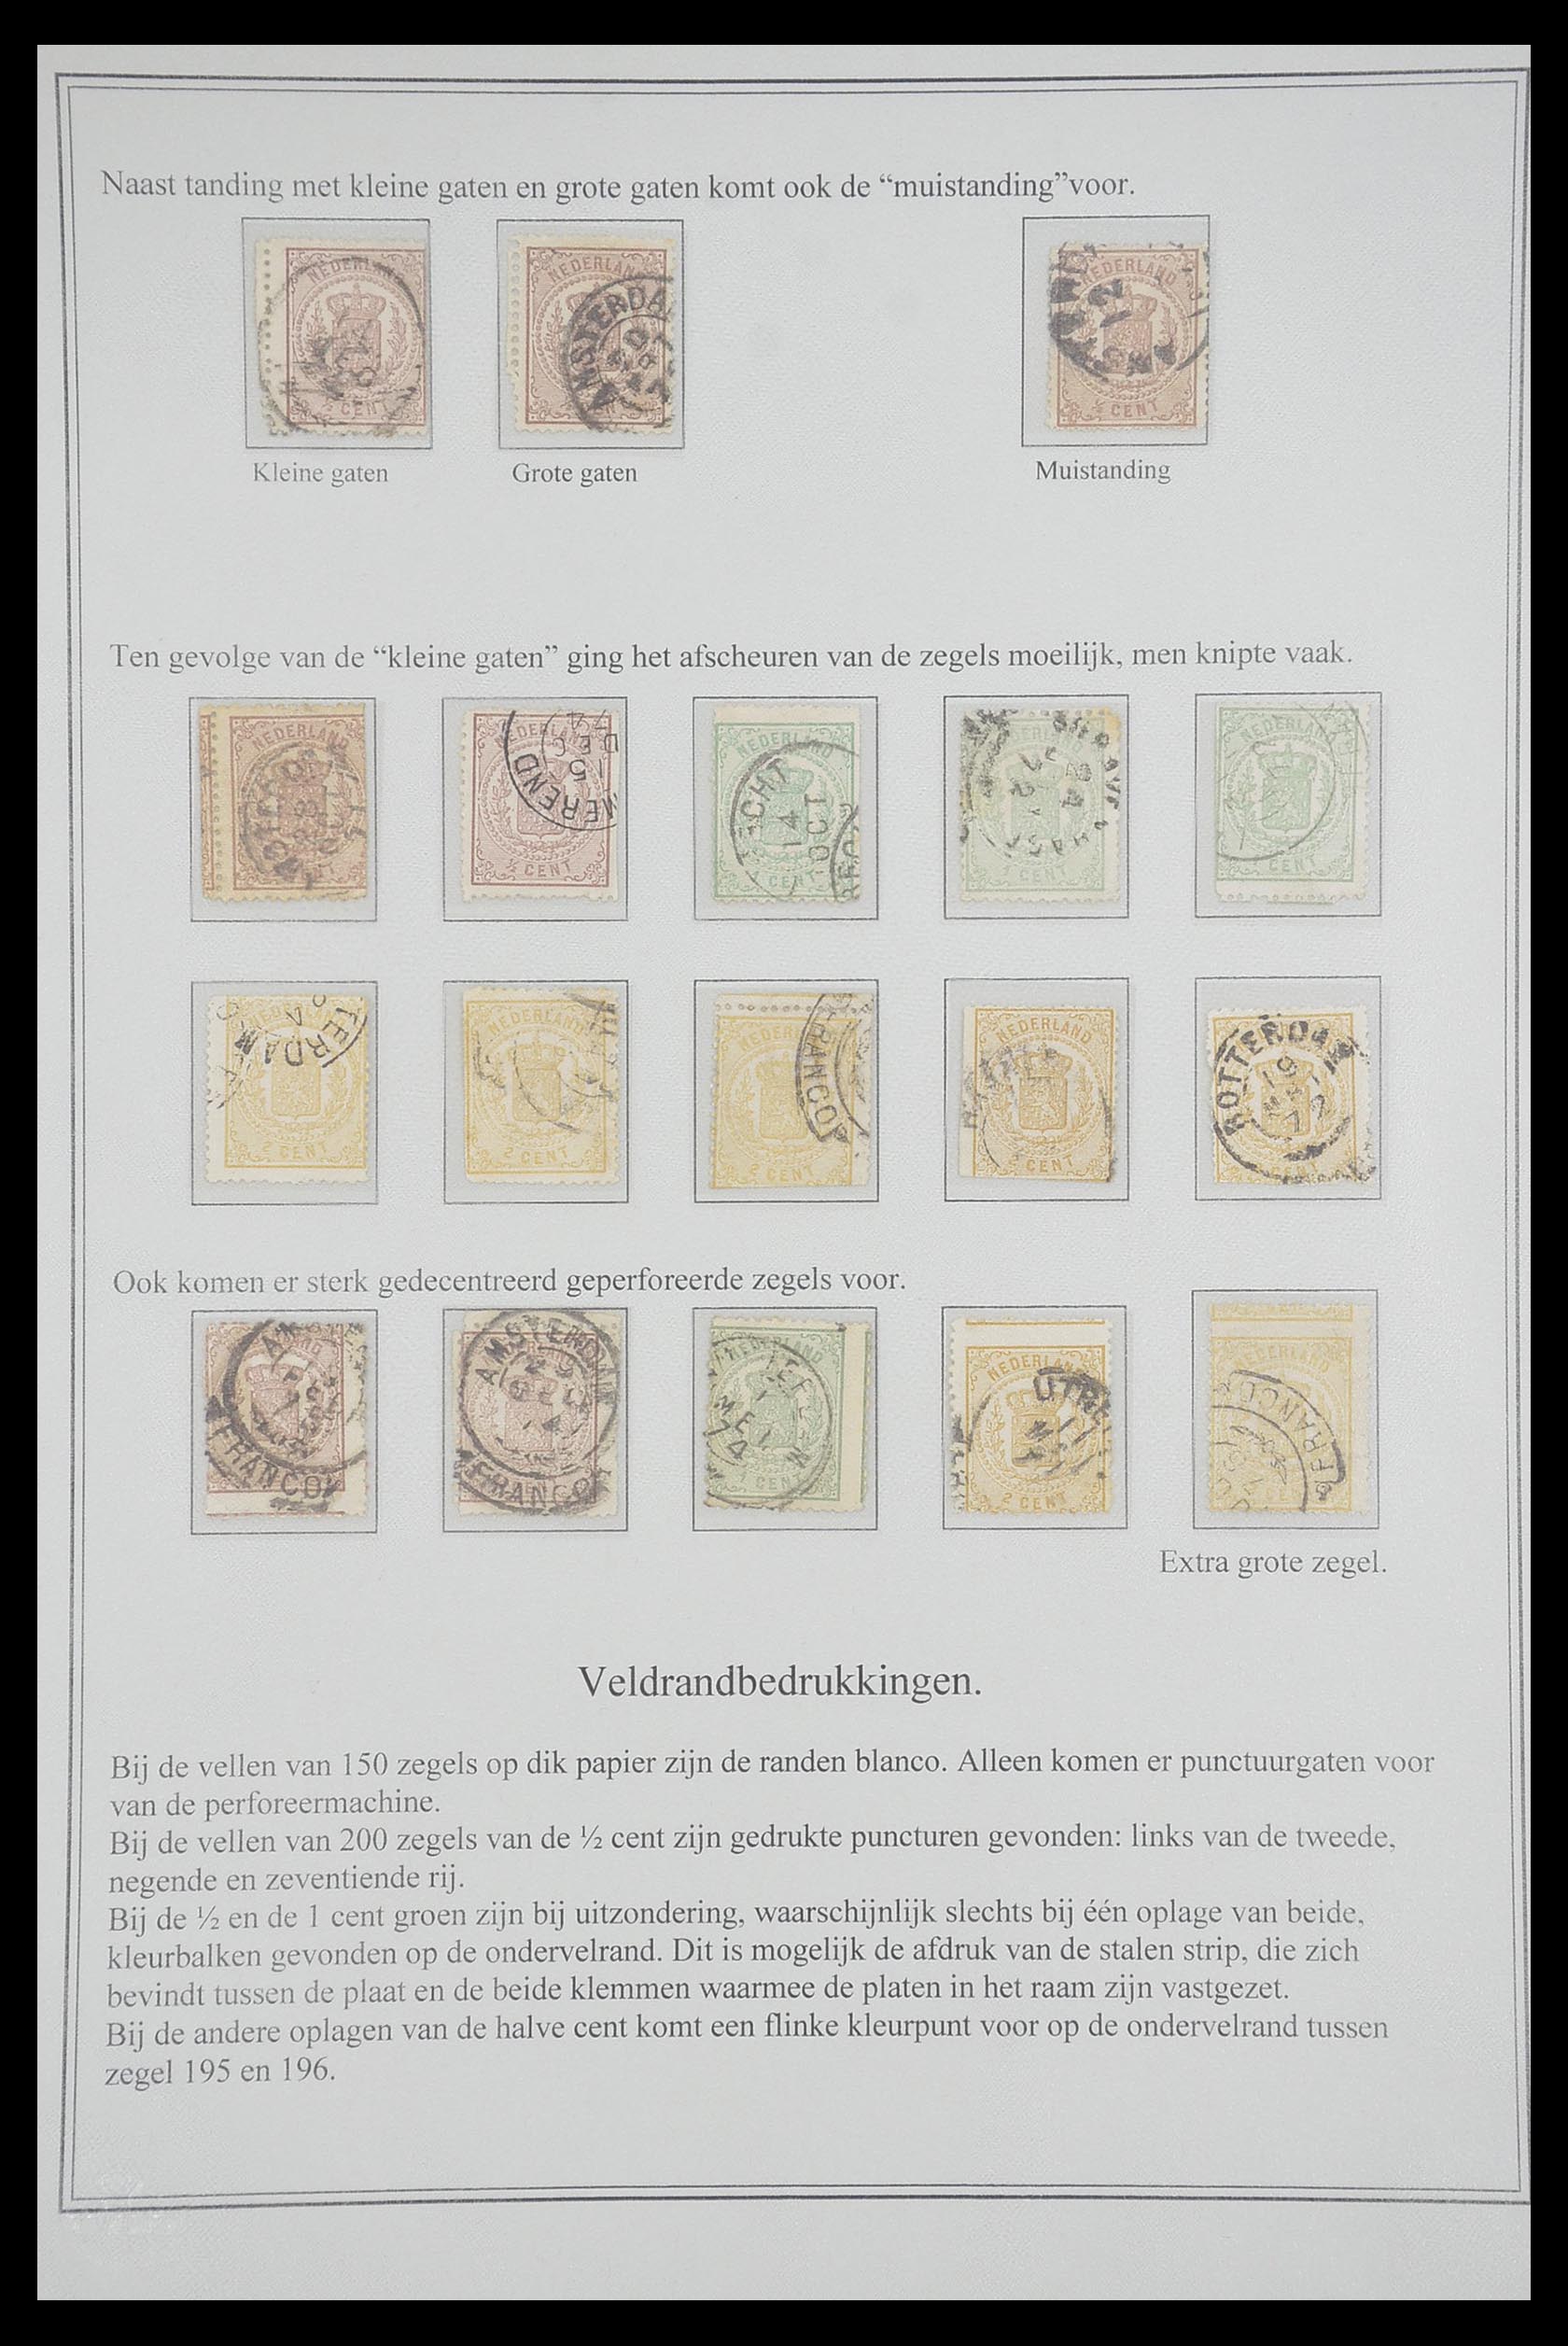 33692 004 - Stamp collection 33692 Netherlands issue 1869-1871.